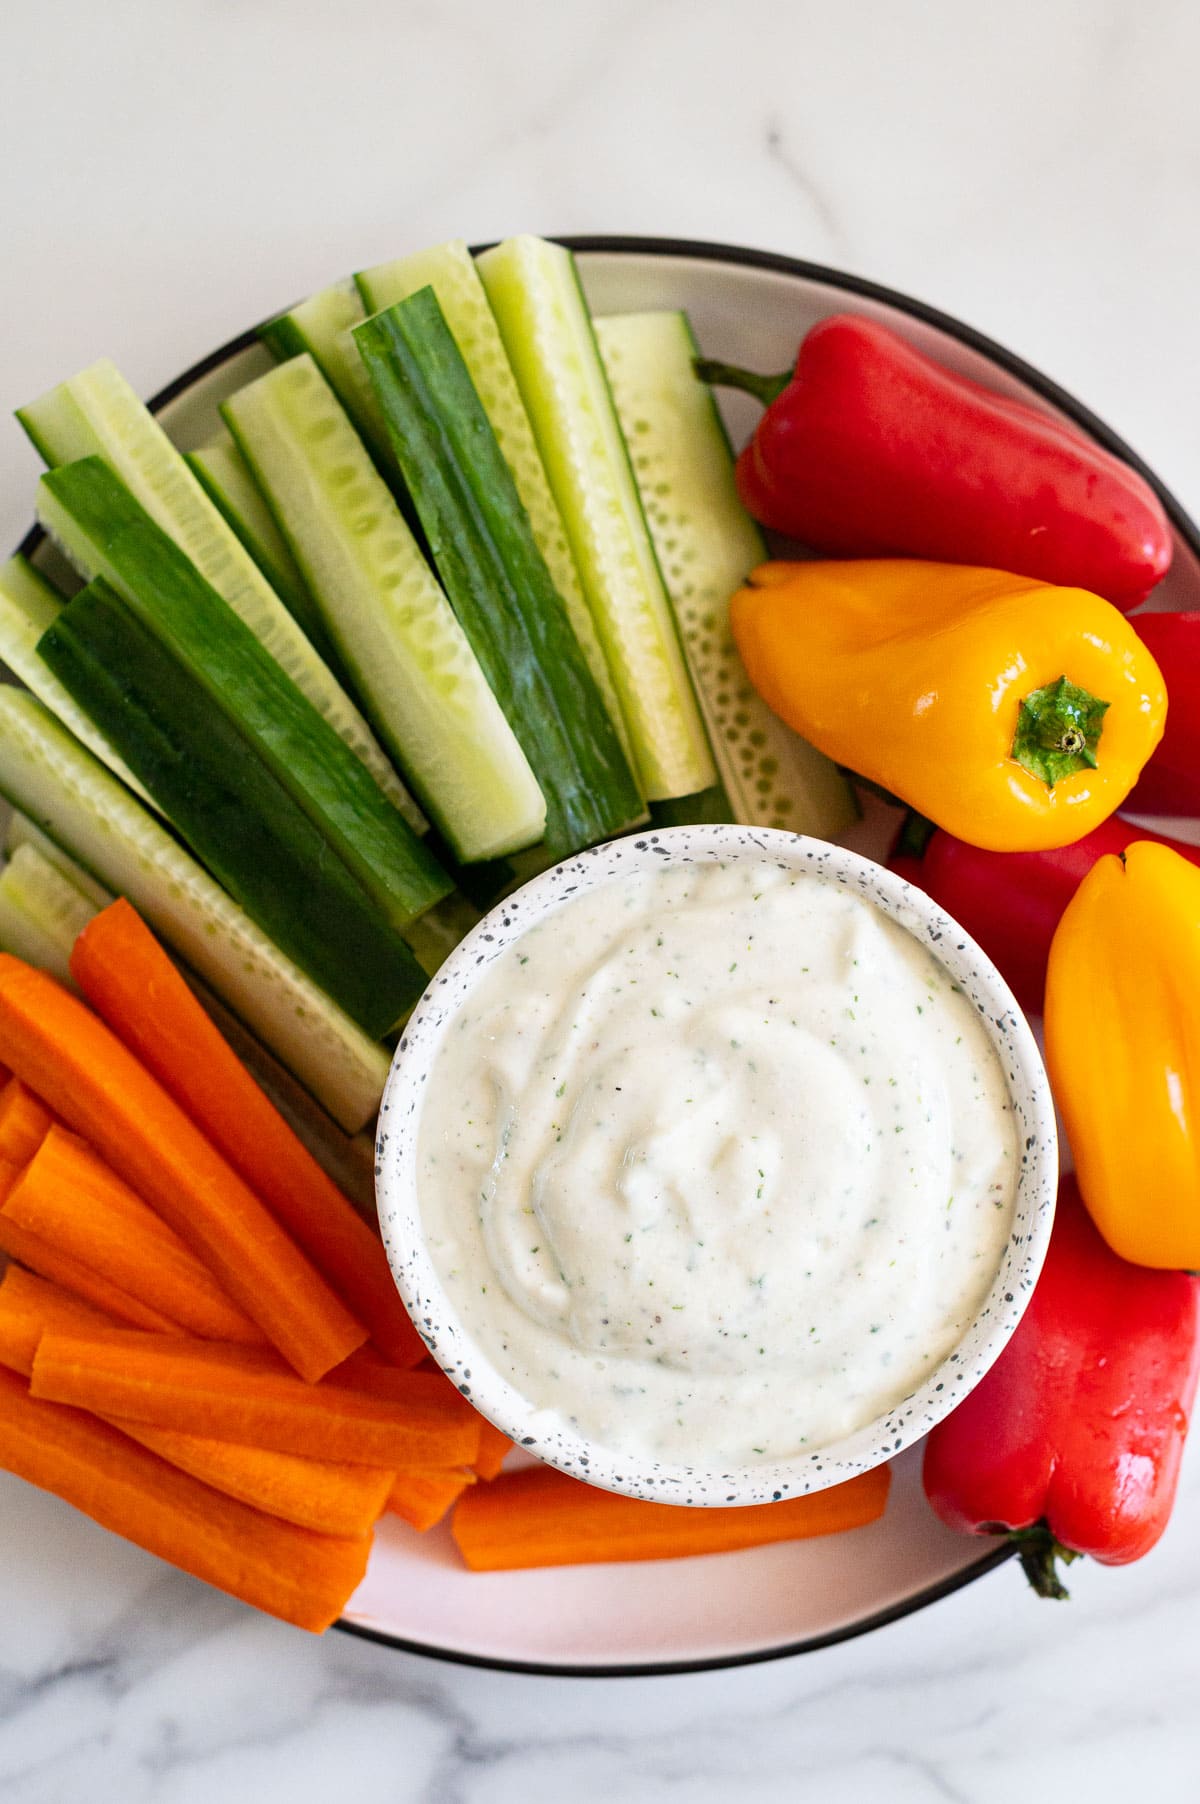 Cottage cheese ranch dip in a bowl served with cucumbers, carrots and bell peppers on a plate.